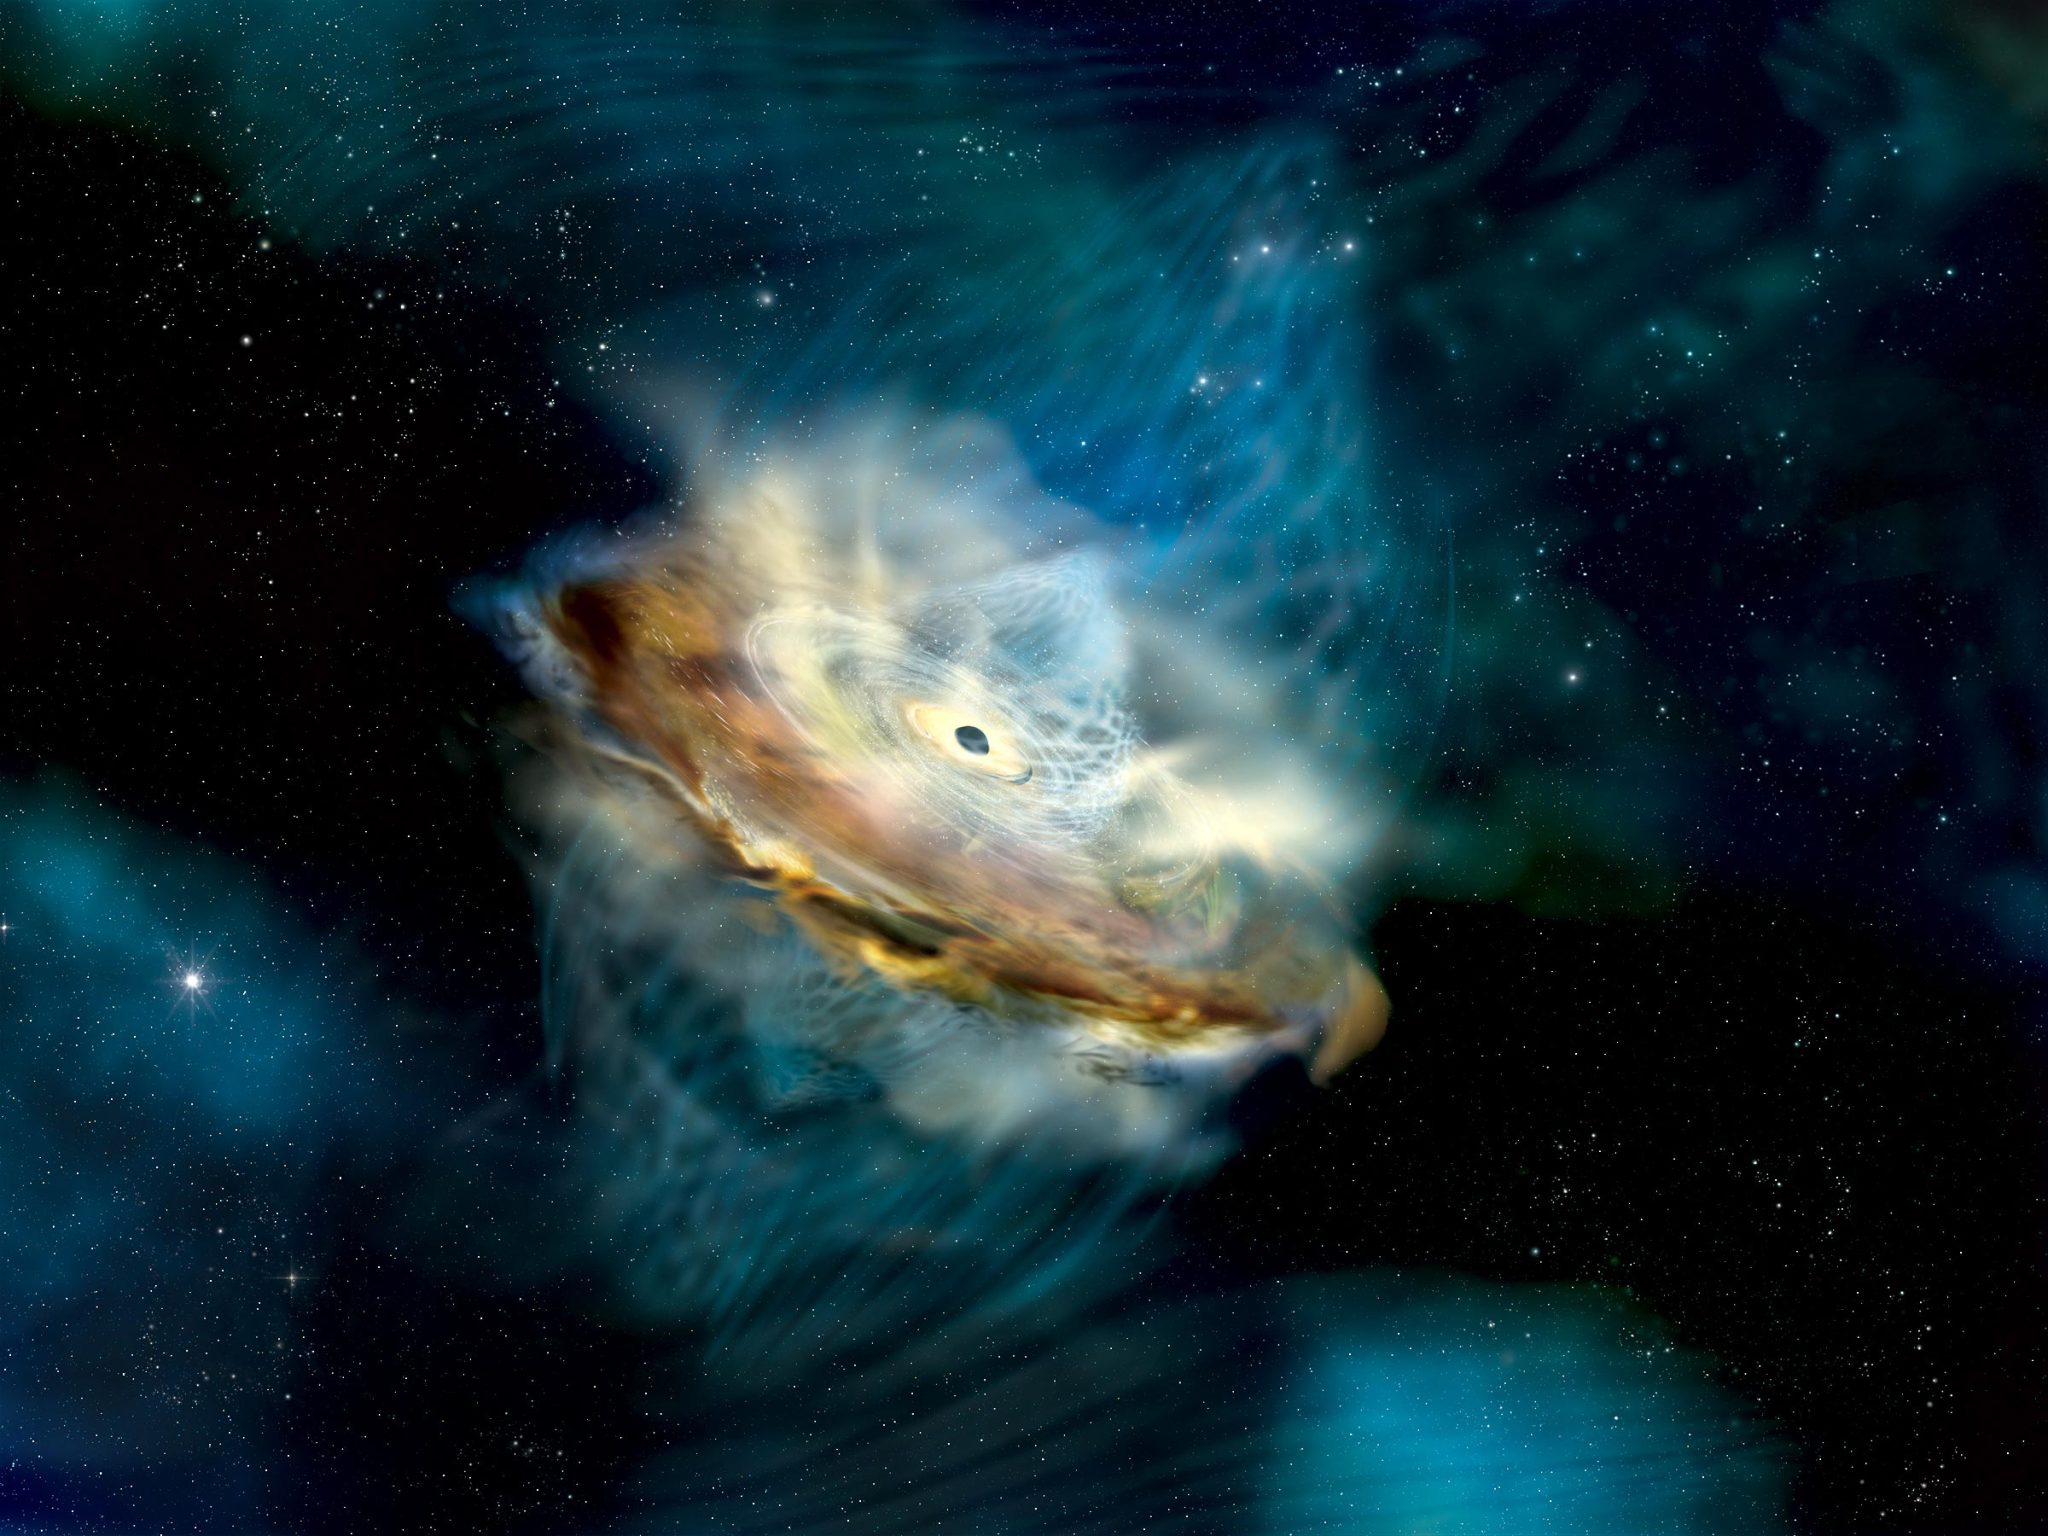 Accretion Disk, Corona, and Supermassive Black Hole of Active Galaxy